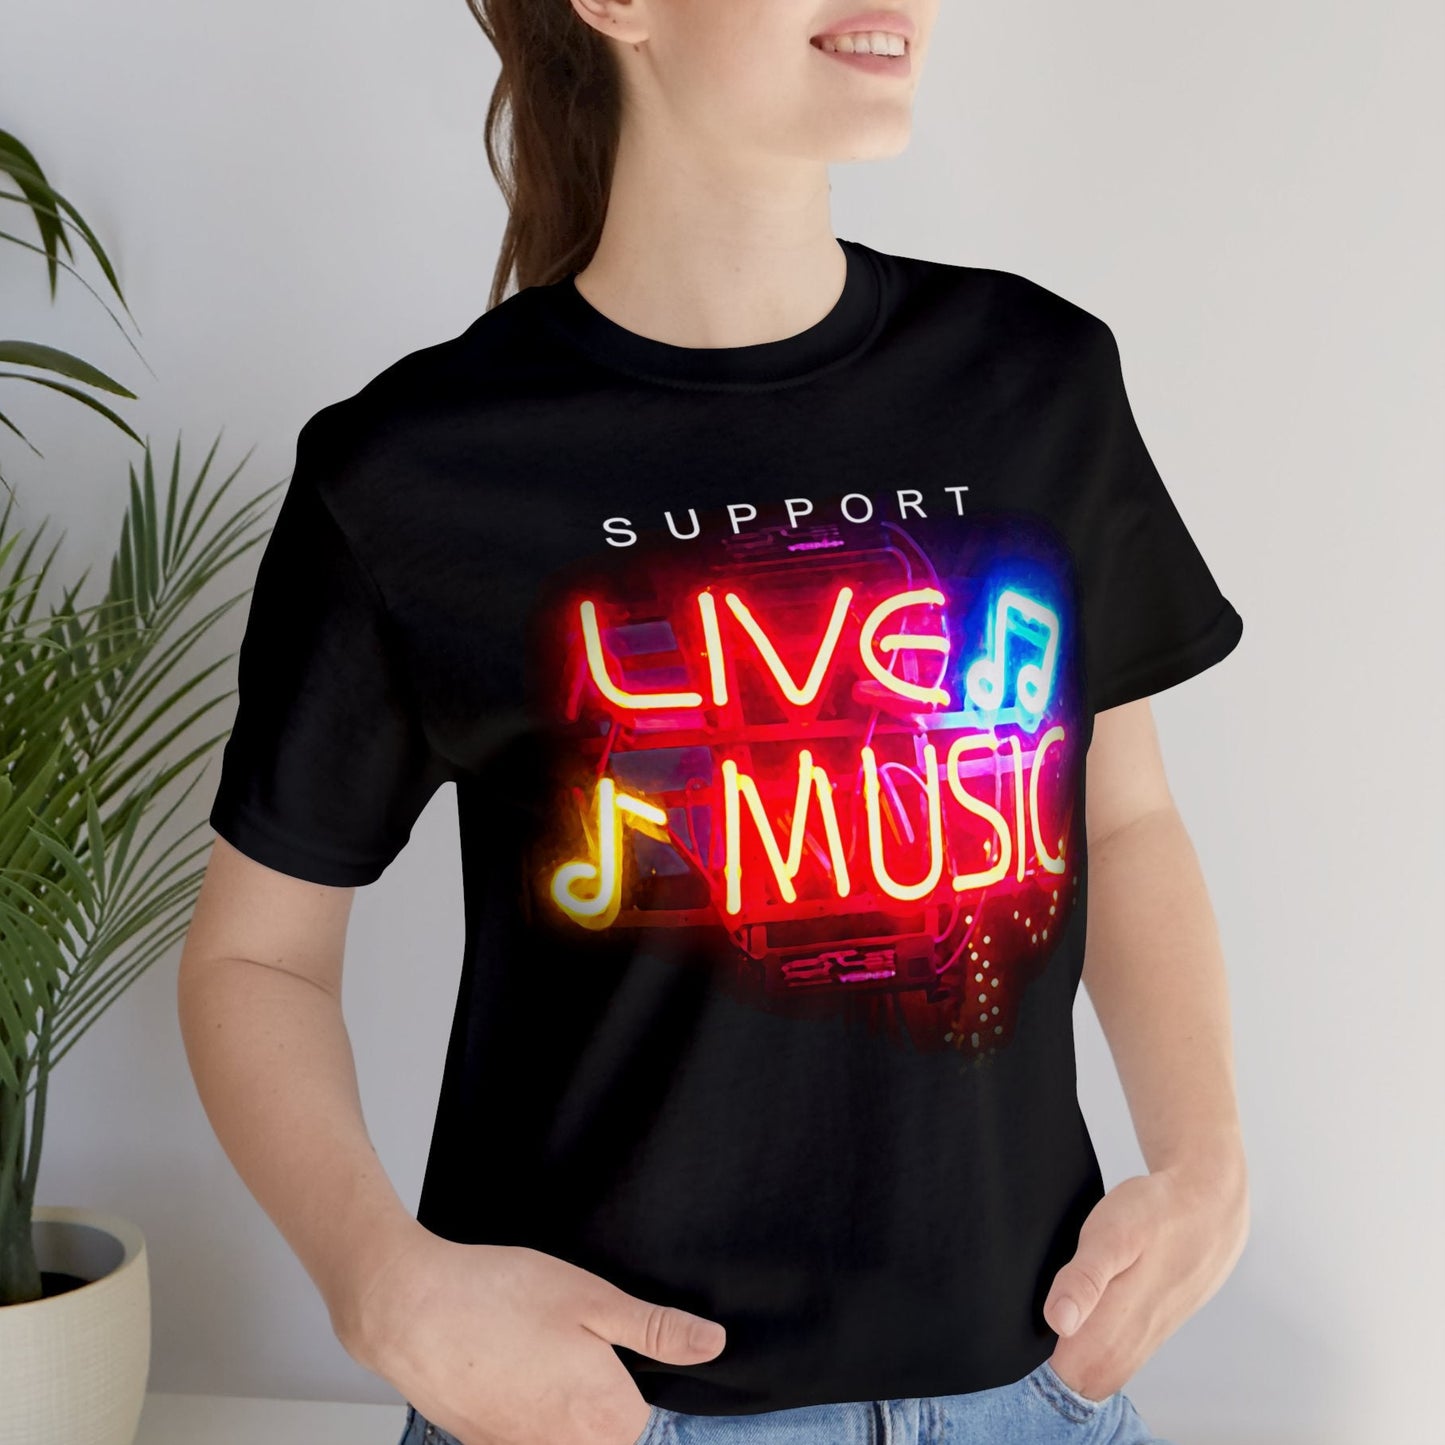 Support LIVE Music Neon Sign Tee - Retro bright on black Unisex Bella+Canvas 3001, Gift for Music Lovers and Musicians